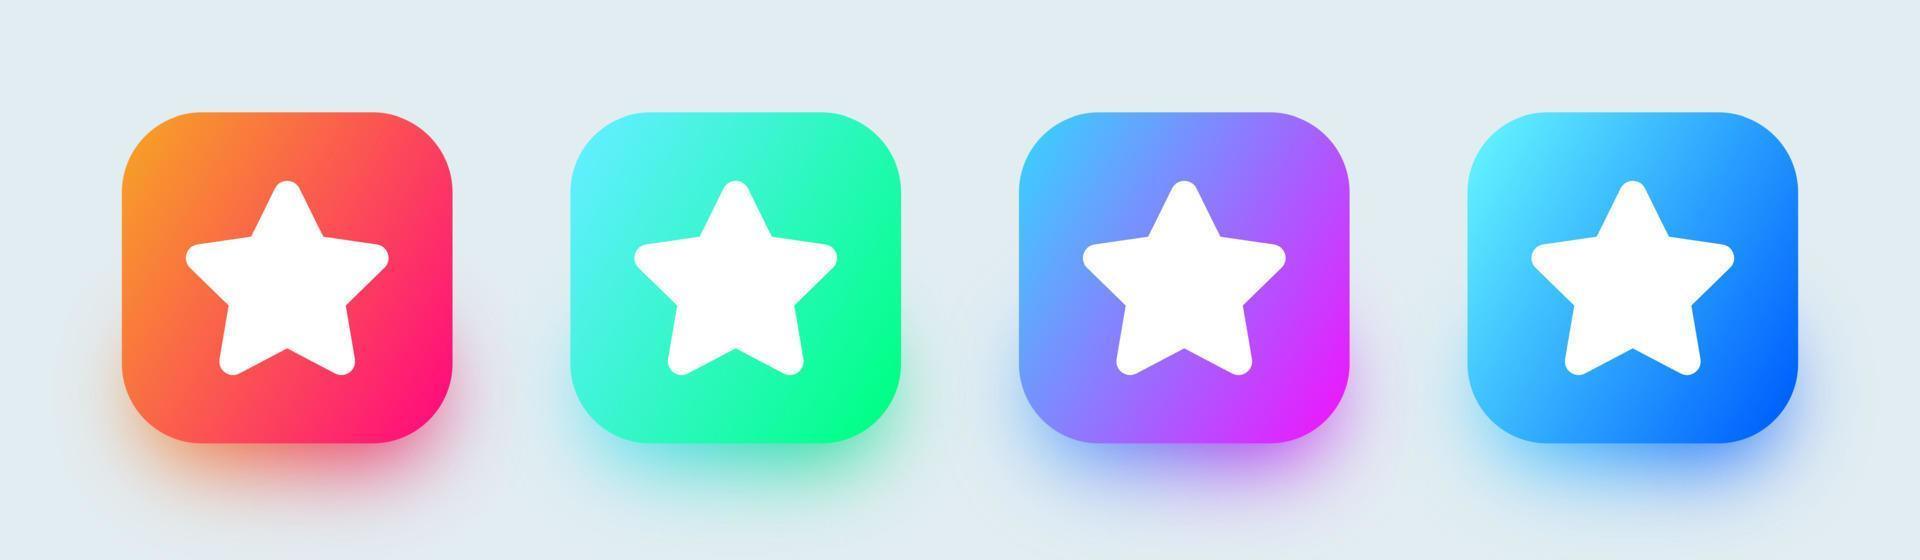 Stars icon set in square and gradient colors. User interface vector icon.